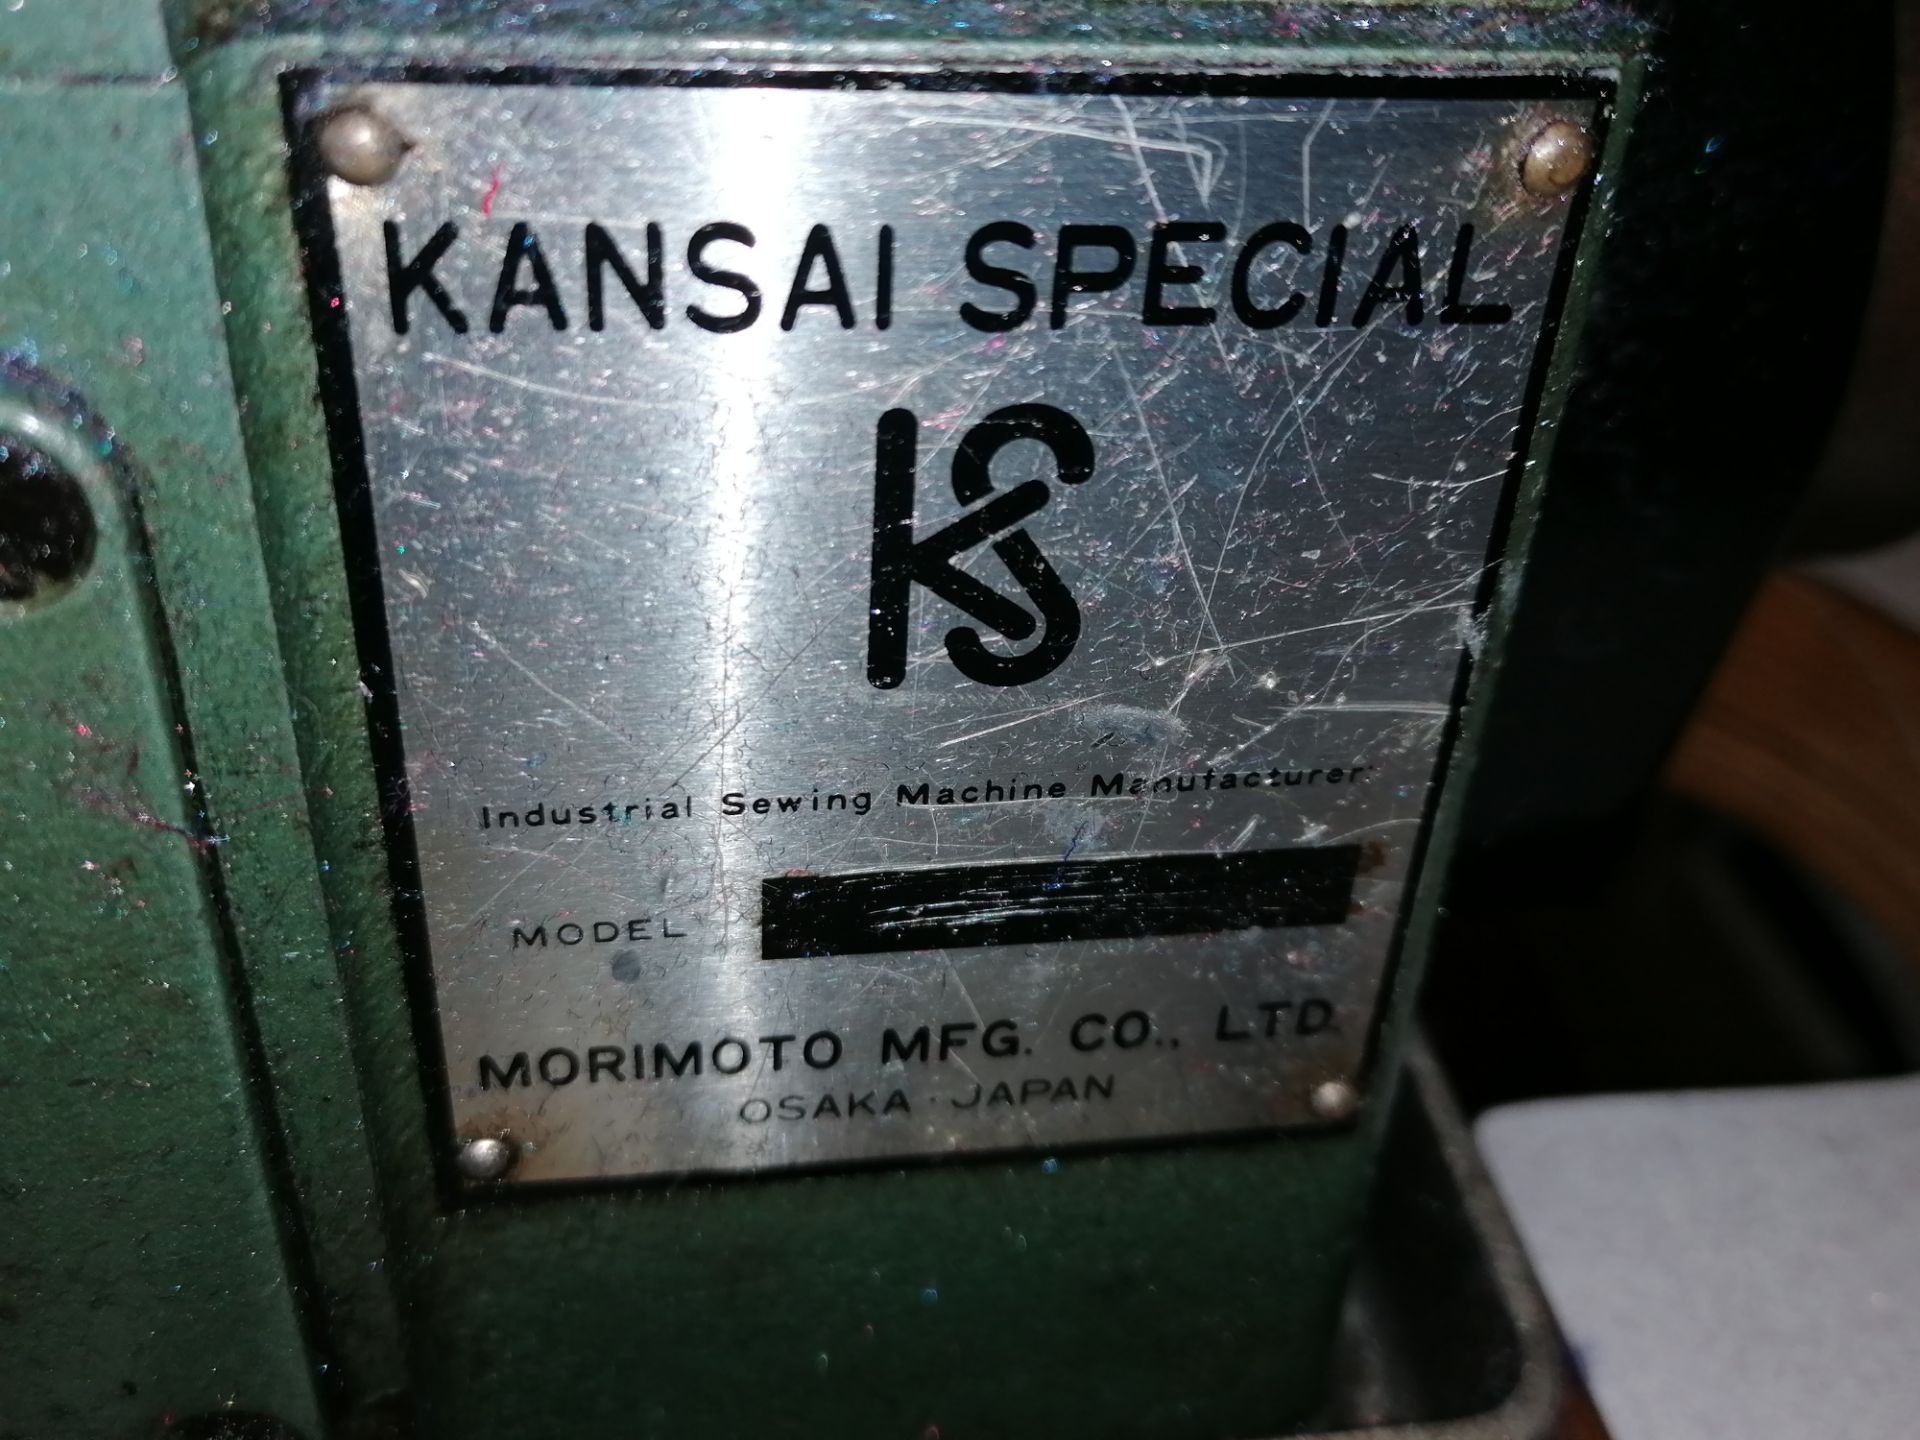 Kansai Special W-8003F Needle cover stitch industrial sewing machine Serial No KS021134 - Image 5 of 5